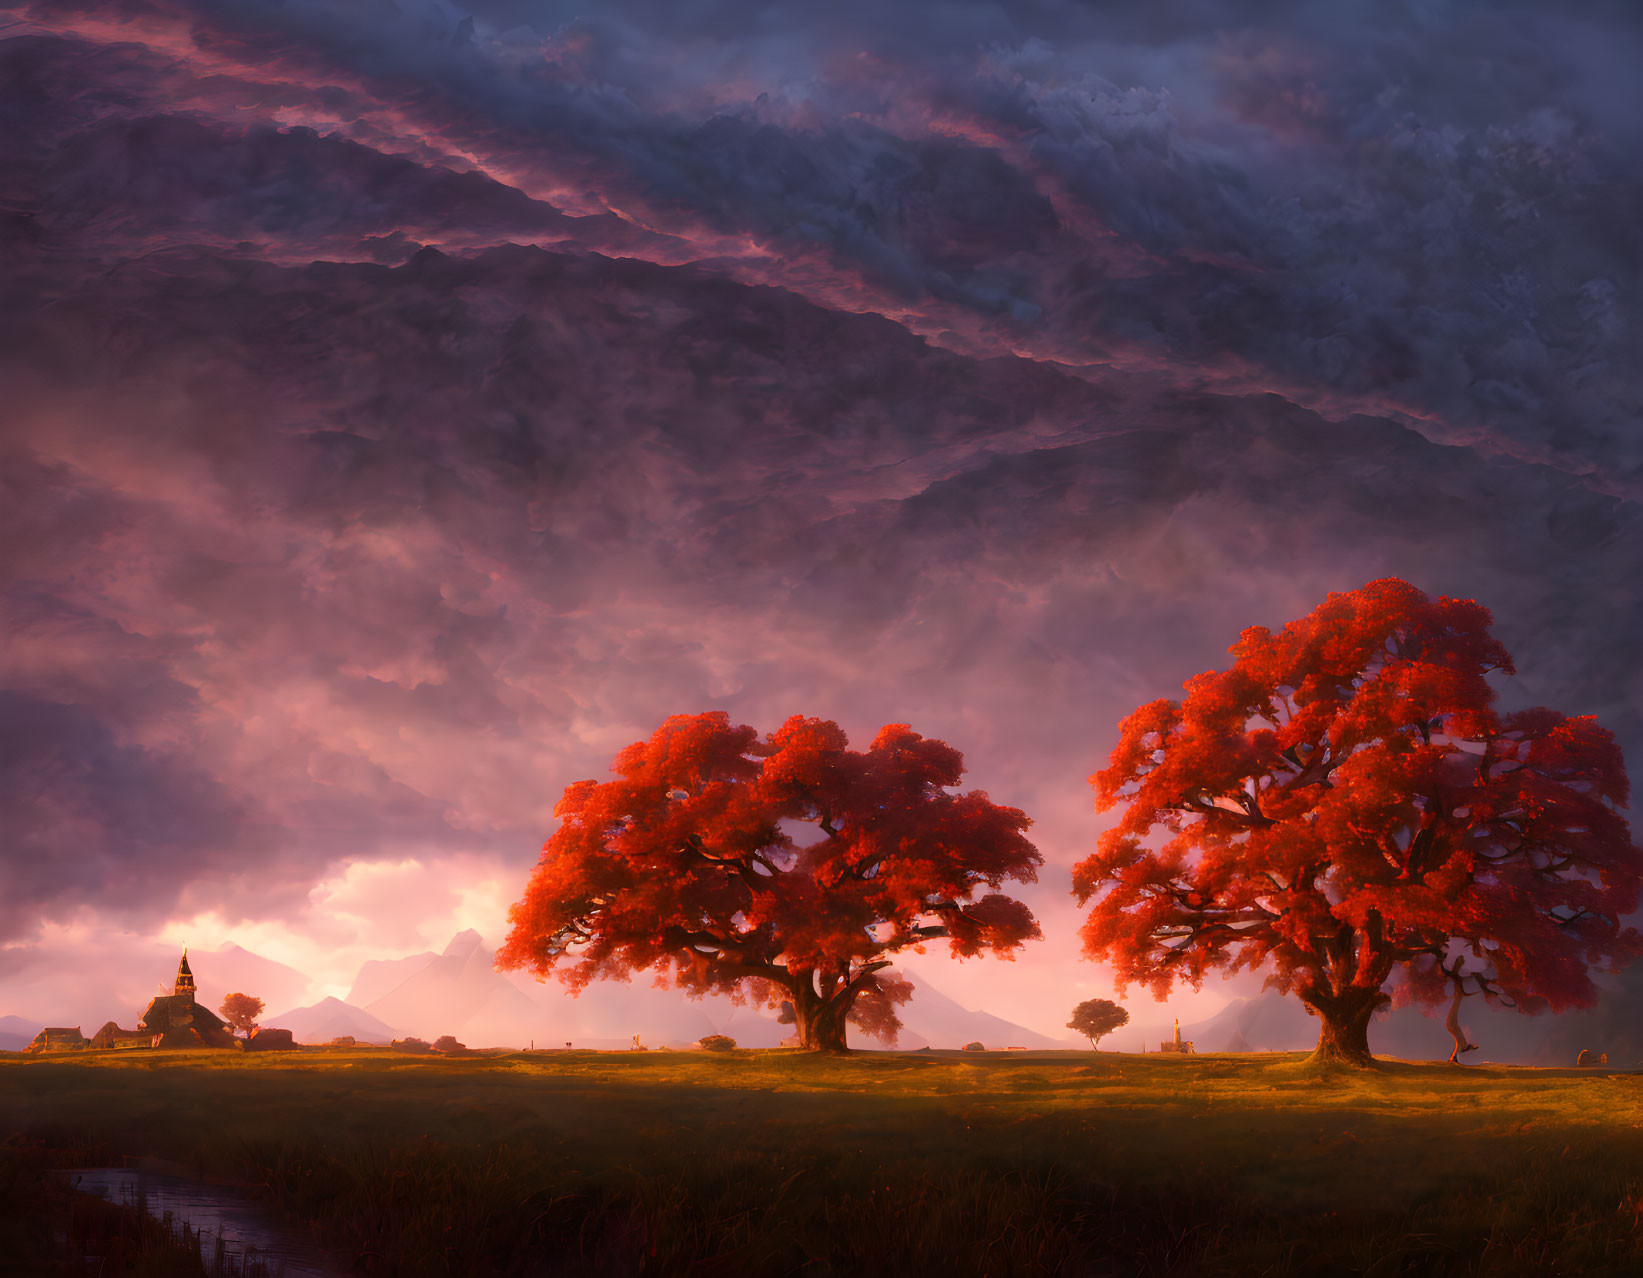 Vibrant red trees in dramatic landscape with house, mountains, and cloudy sky at sunset